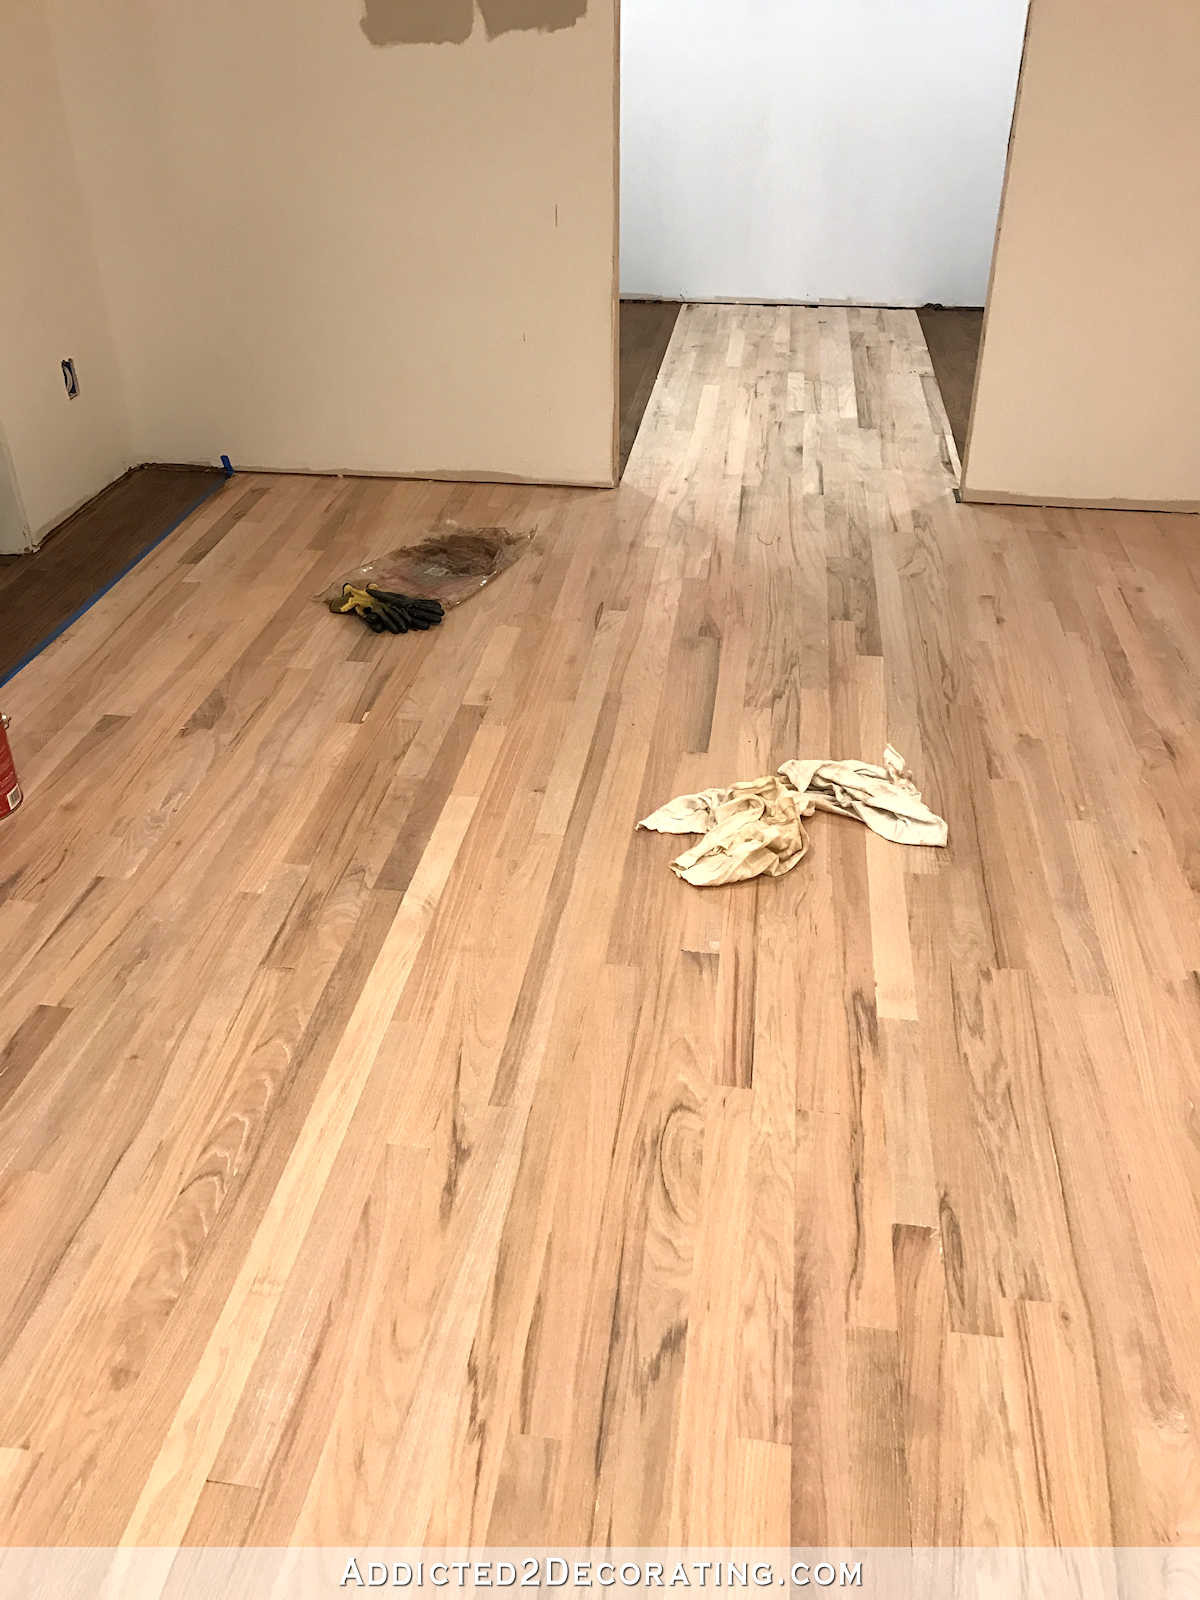 hardwood floor finishing products of adventures in staining my red oak hardwood floors products process for staining red oak hardwood floors 12 breakfast room and center of pantry left to